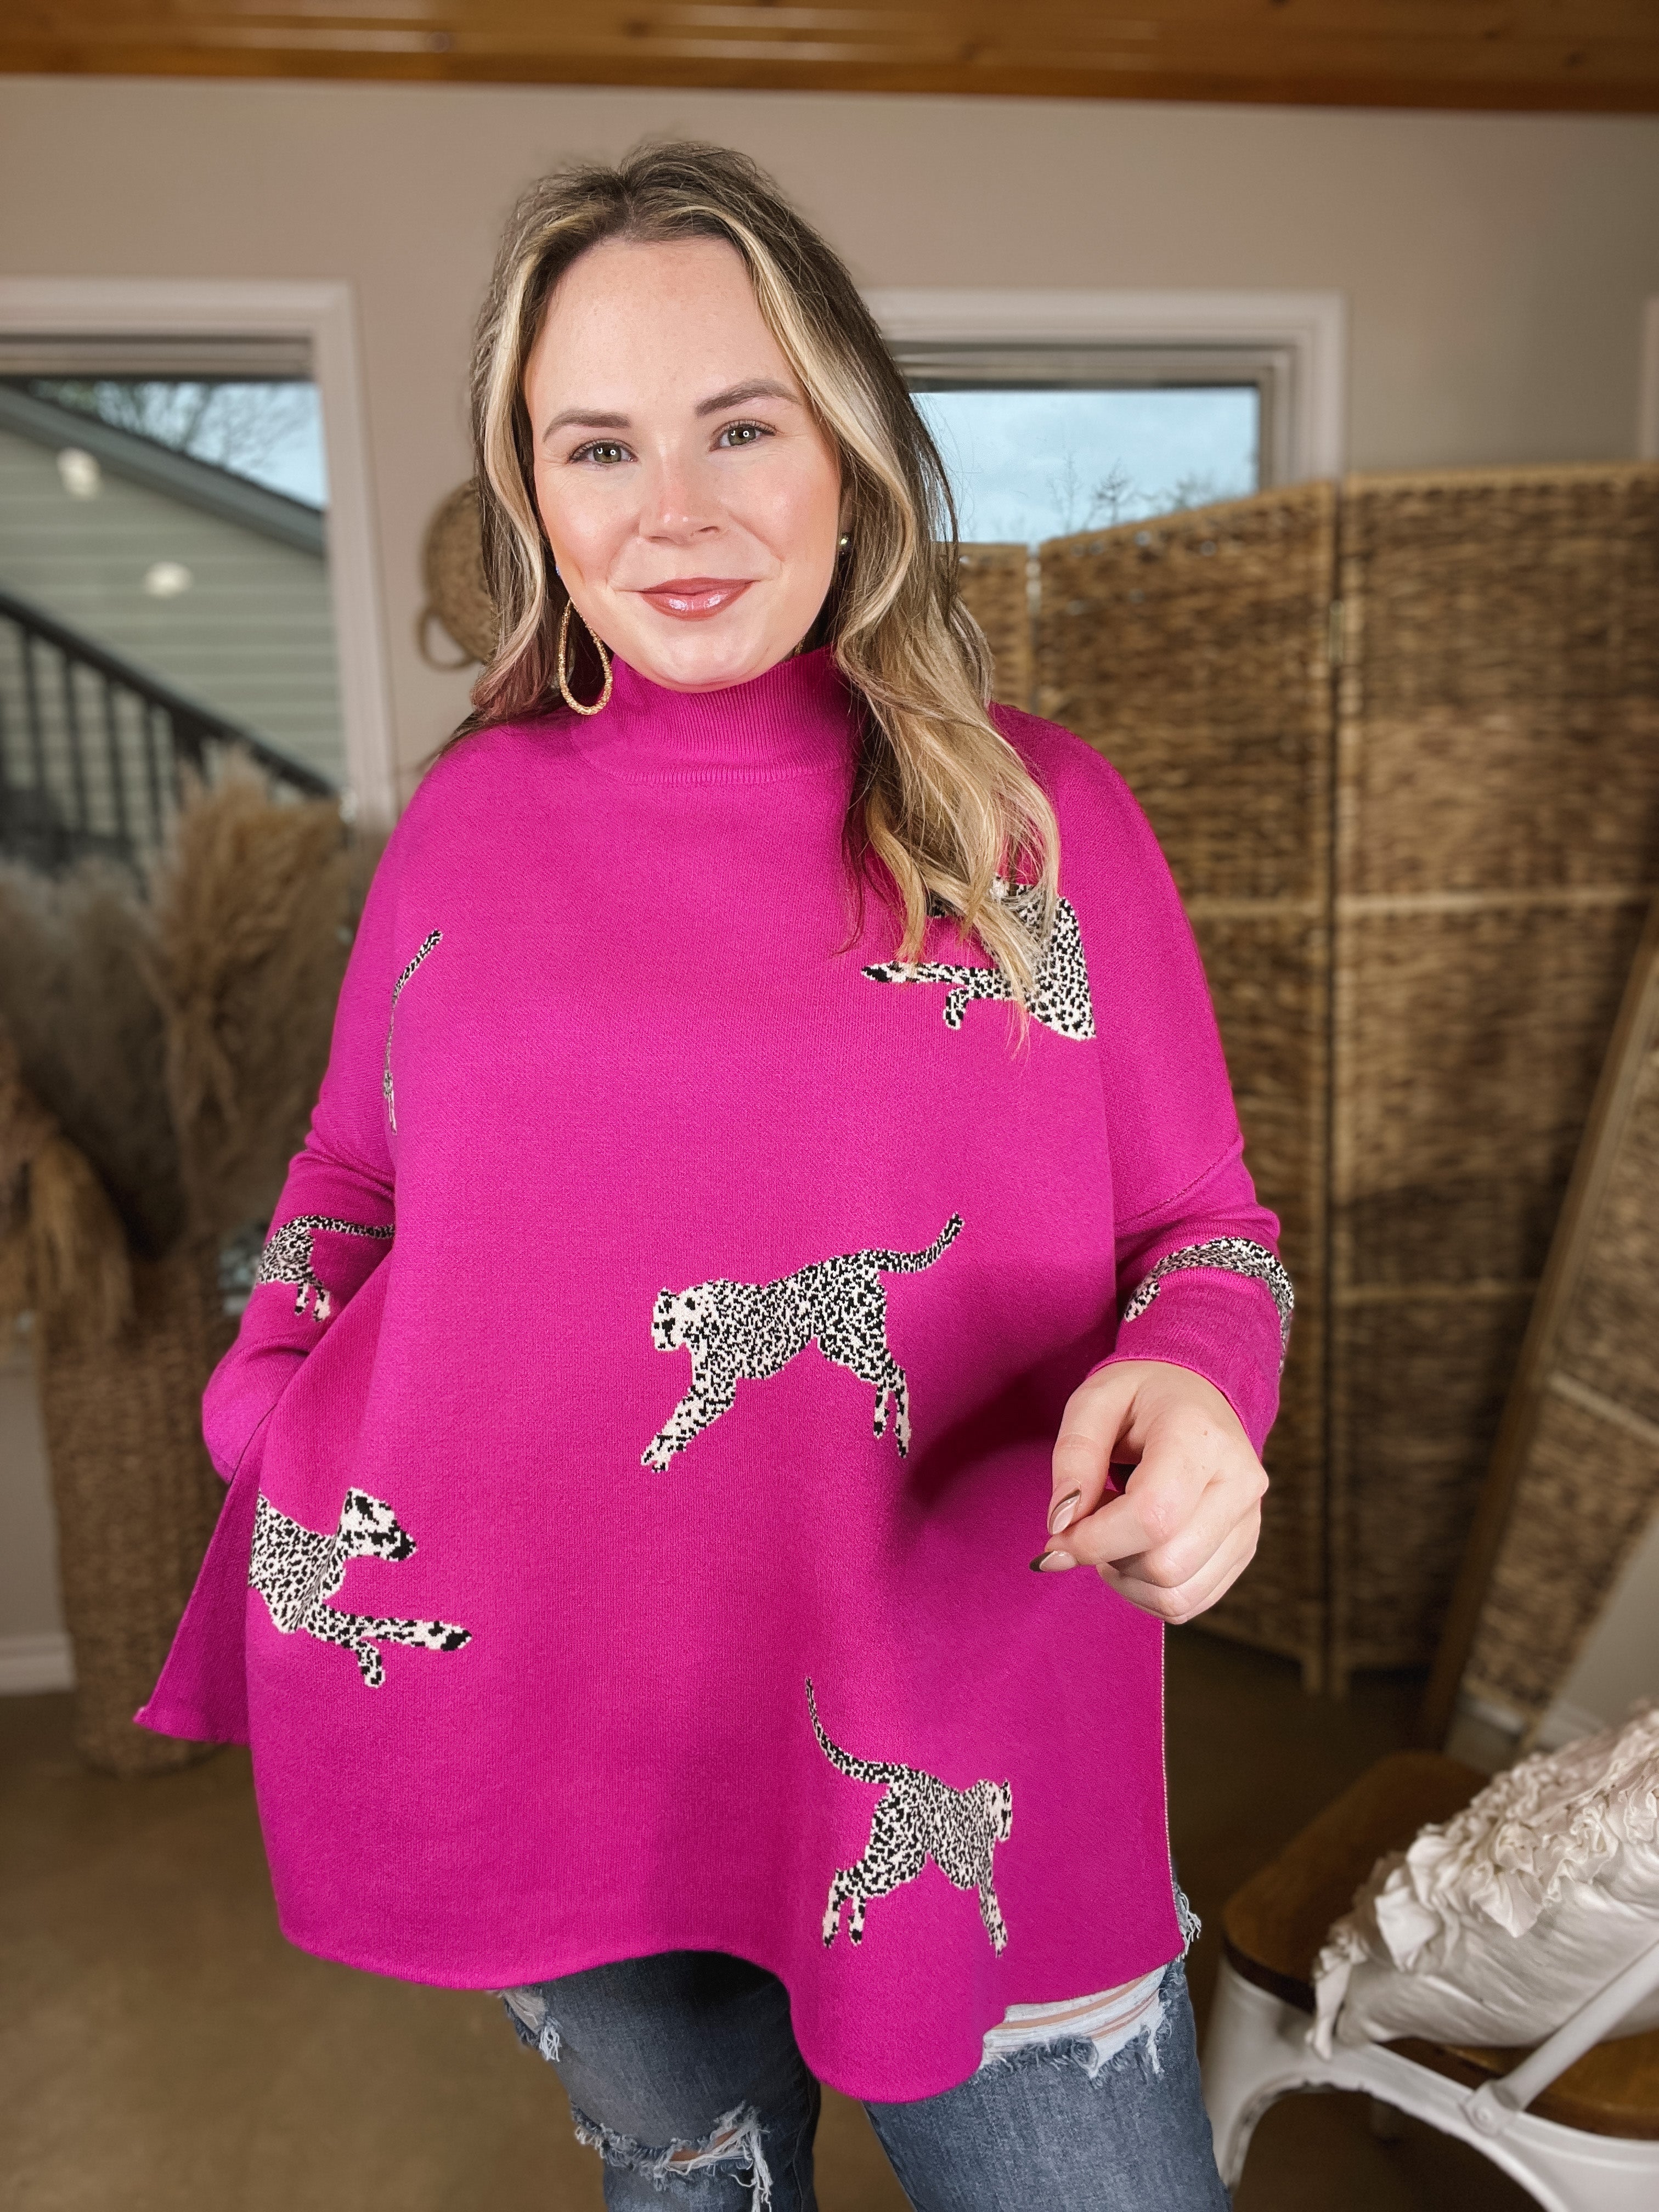 Cheetah Girls Mock Neck Cheetah Print Sweater in Hot Pink - Giddy Up Glamour Boutique